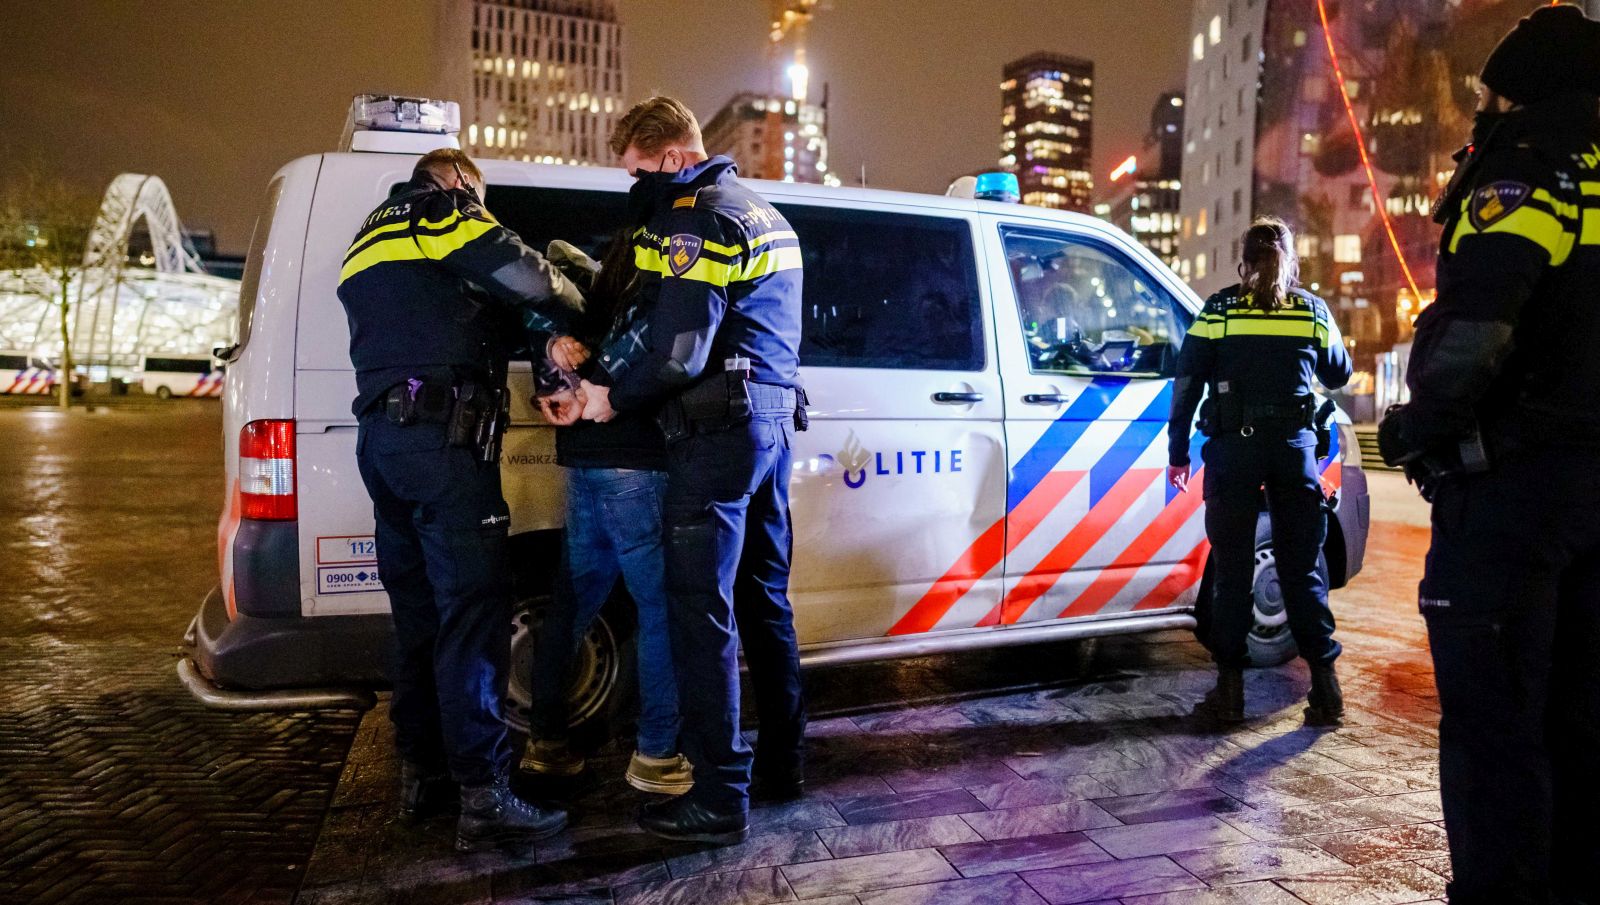 epa08961340 A man is arrested by the police after a protest against the curfew on the Binnenrotte near the Markthal in Rotterdam, The Netherlands, 23 January 2021. Due to the Covid-19 pandemic, there is a curfew throughout the Netherlands from 23 January and lasts from 9:00 PM to 4:30 AM.  EPA/MARCO DE SWART